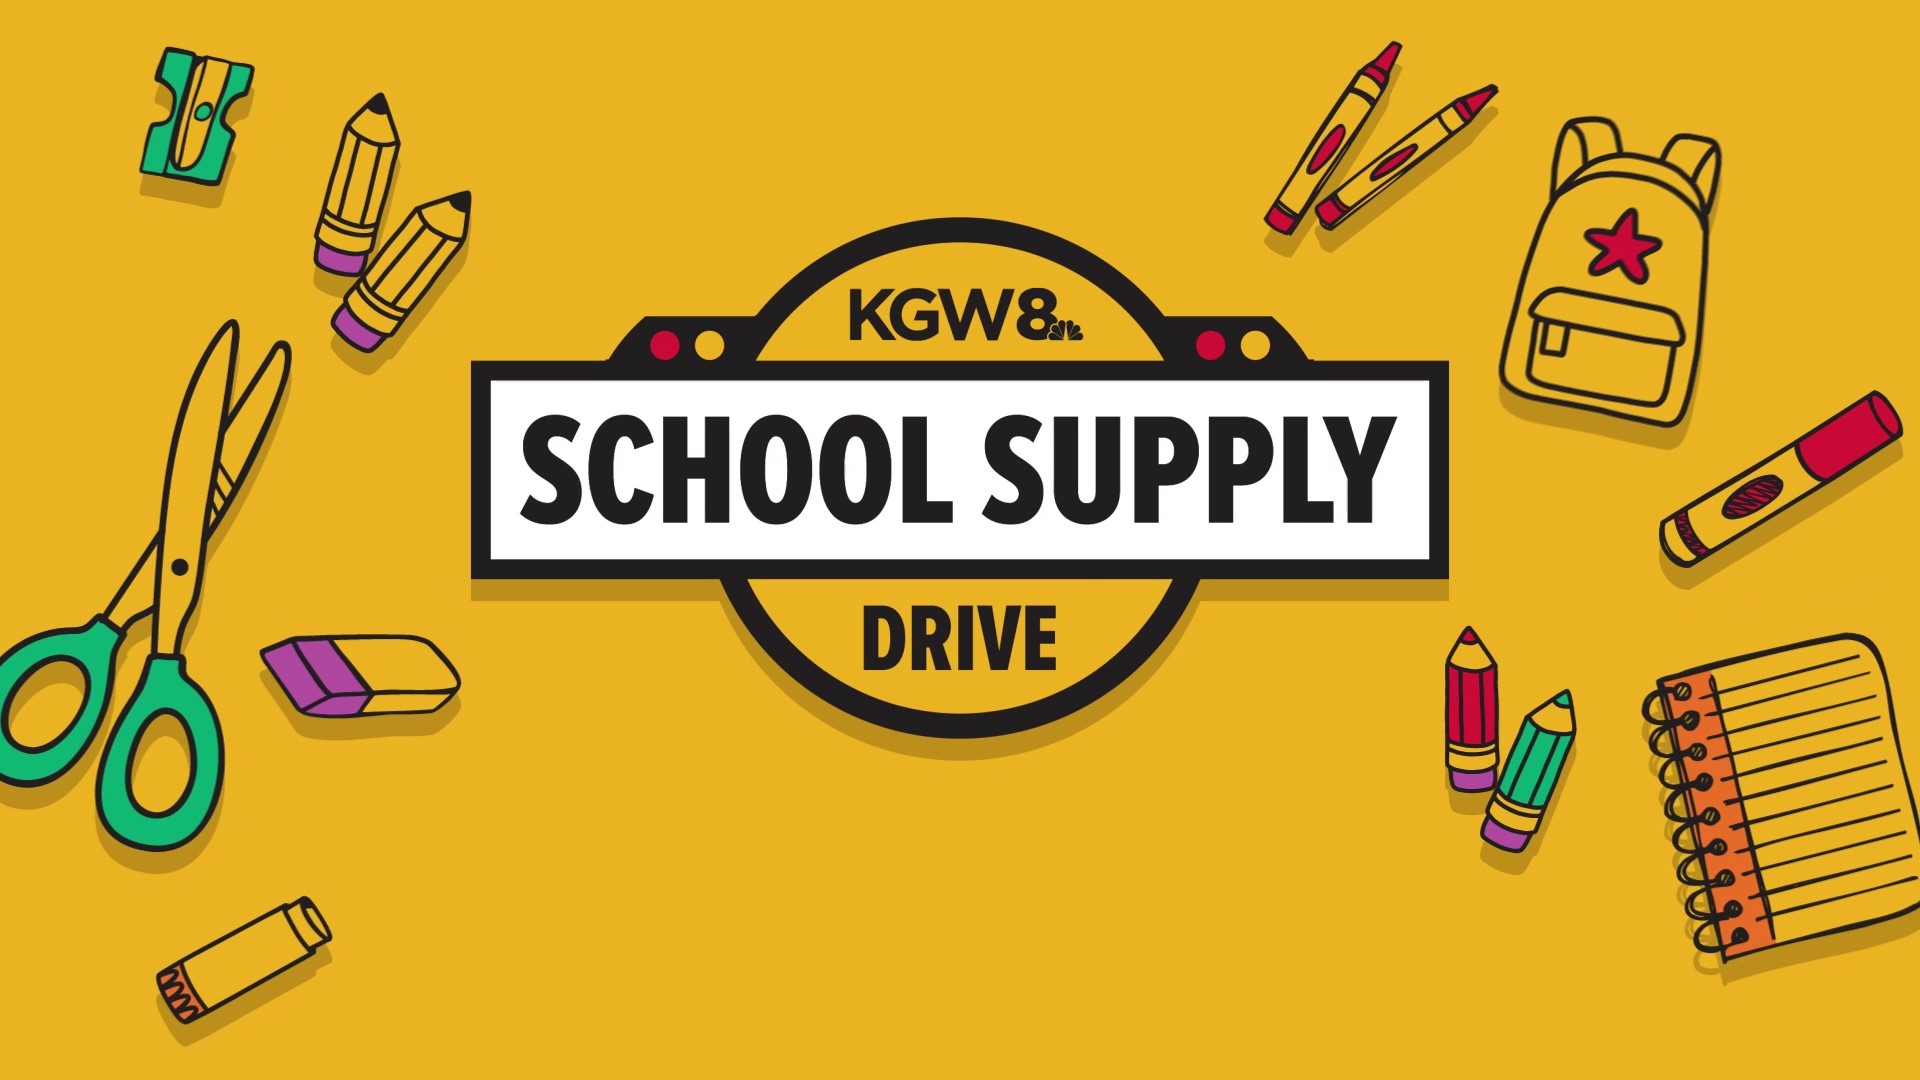 KGW School Supply Drive 15th annual special features stories from KGW News, local teachers, Schoolhouse Supply and the sponsors who make the drive possible